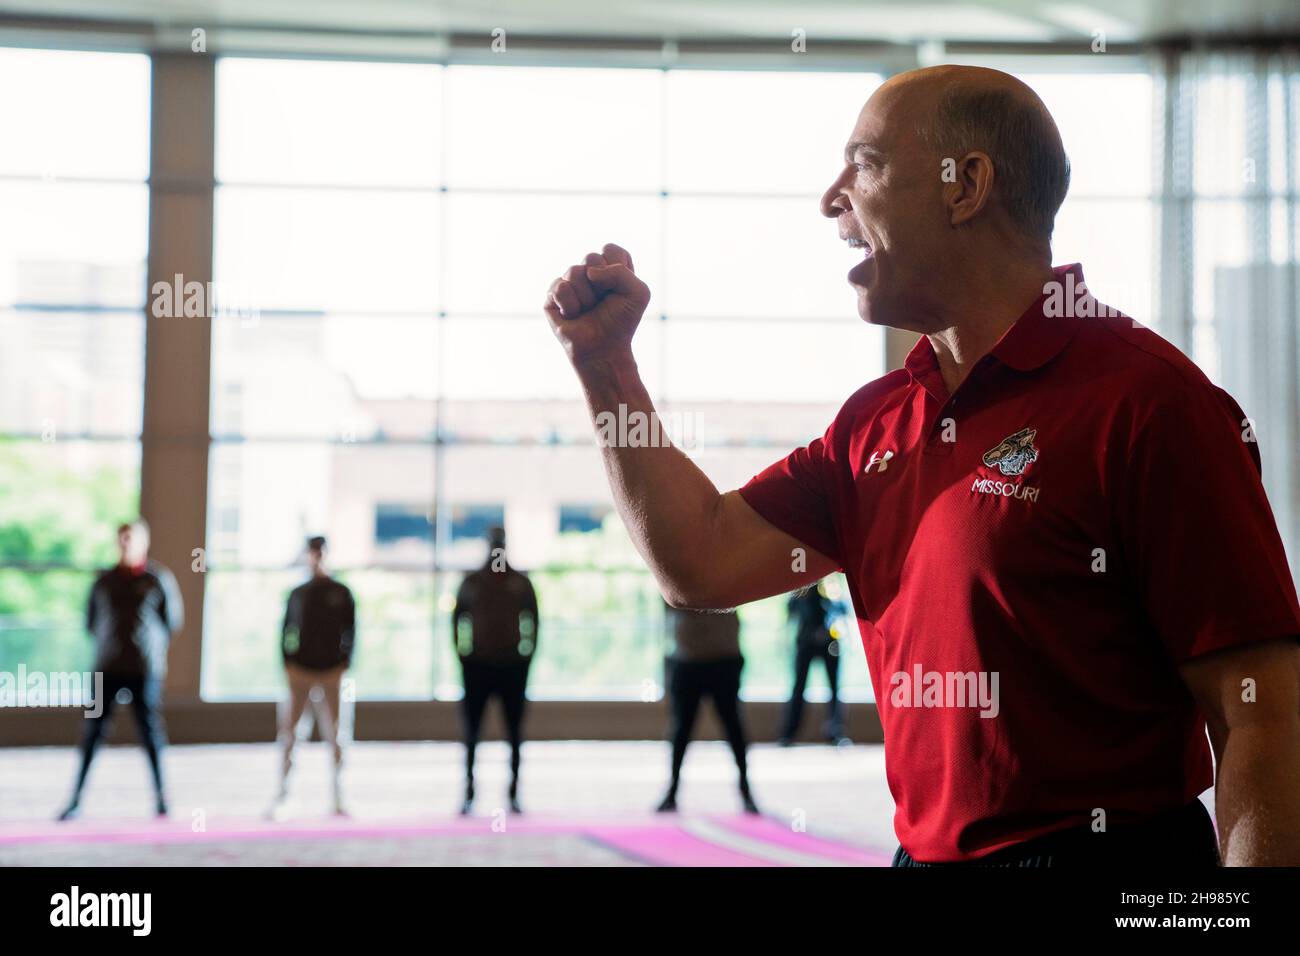 J. K SIMMONS in NATIONAL CHAMPIONS (2021), directed by RIC ROMAN WAUGH. Credit: Thunder Road Pictures / Album Stock Photo